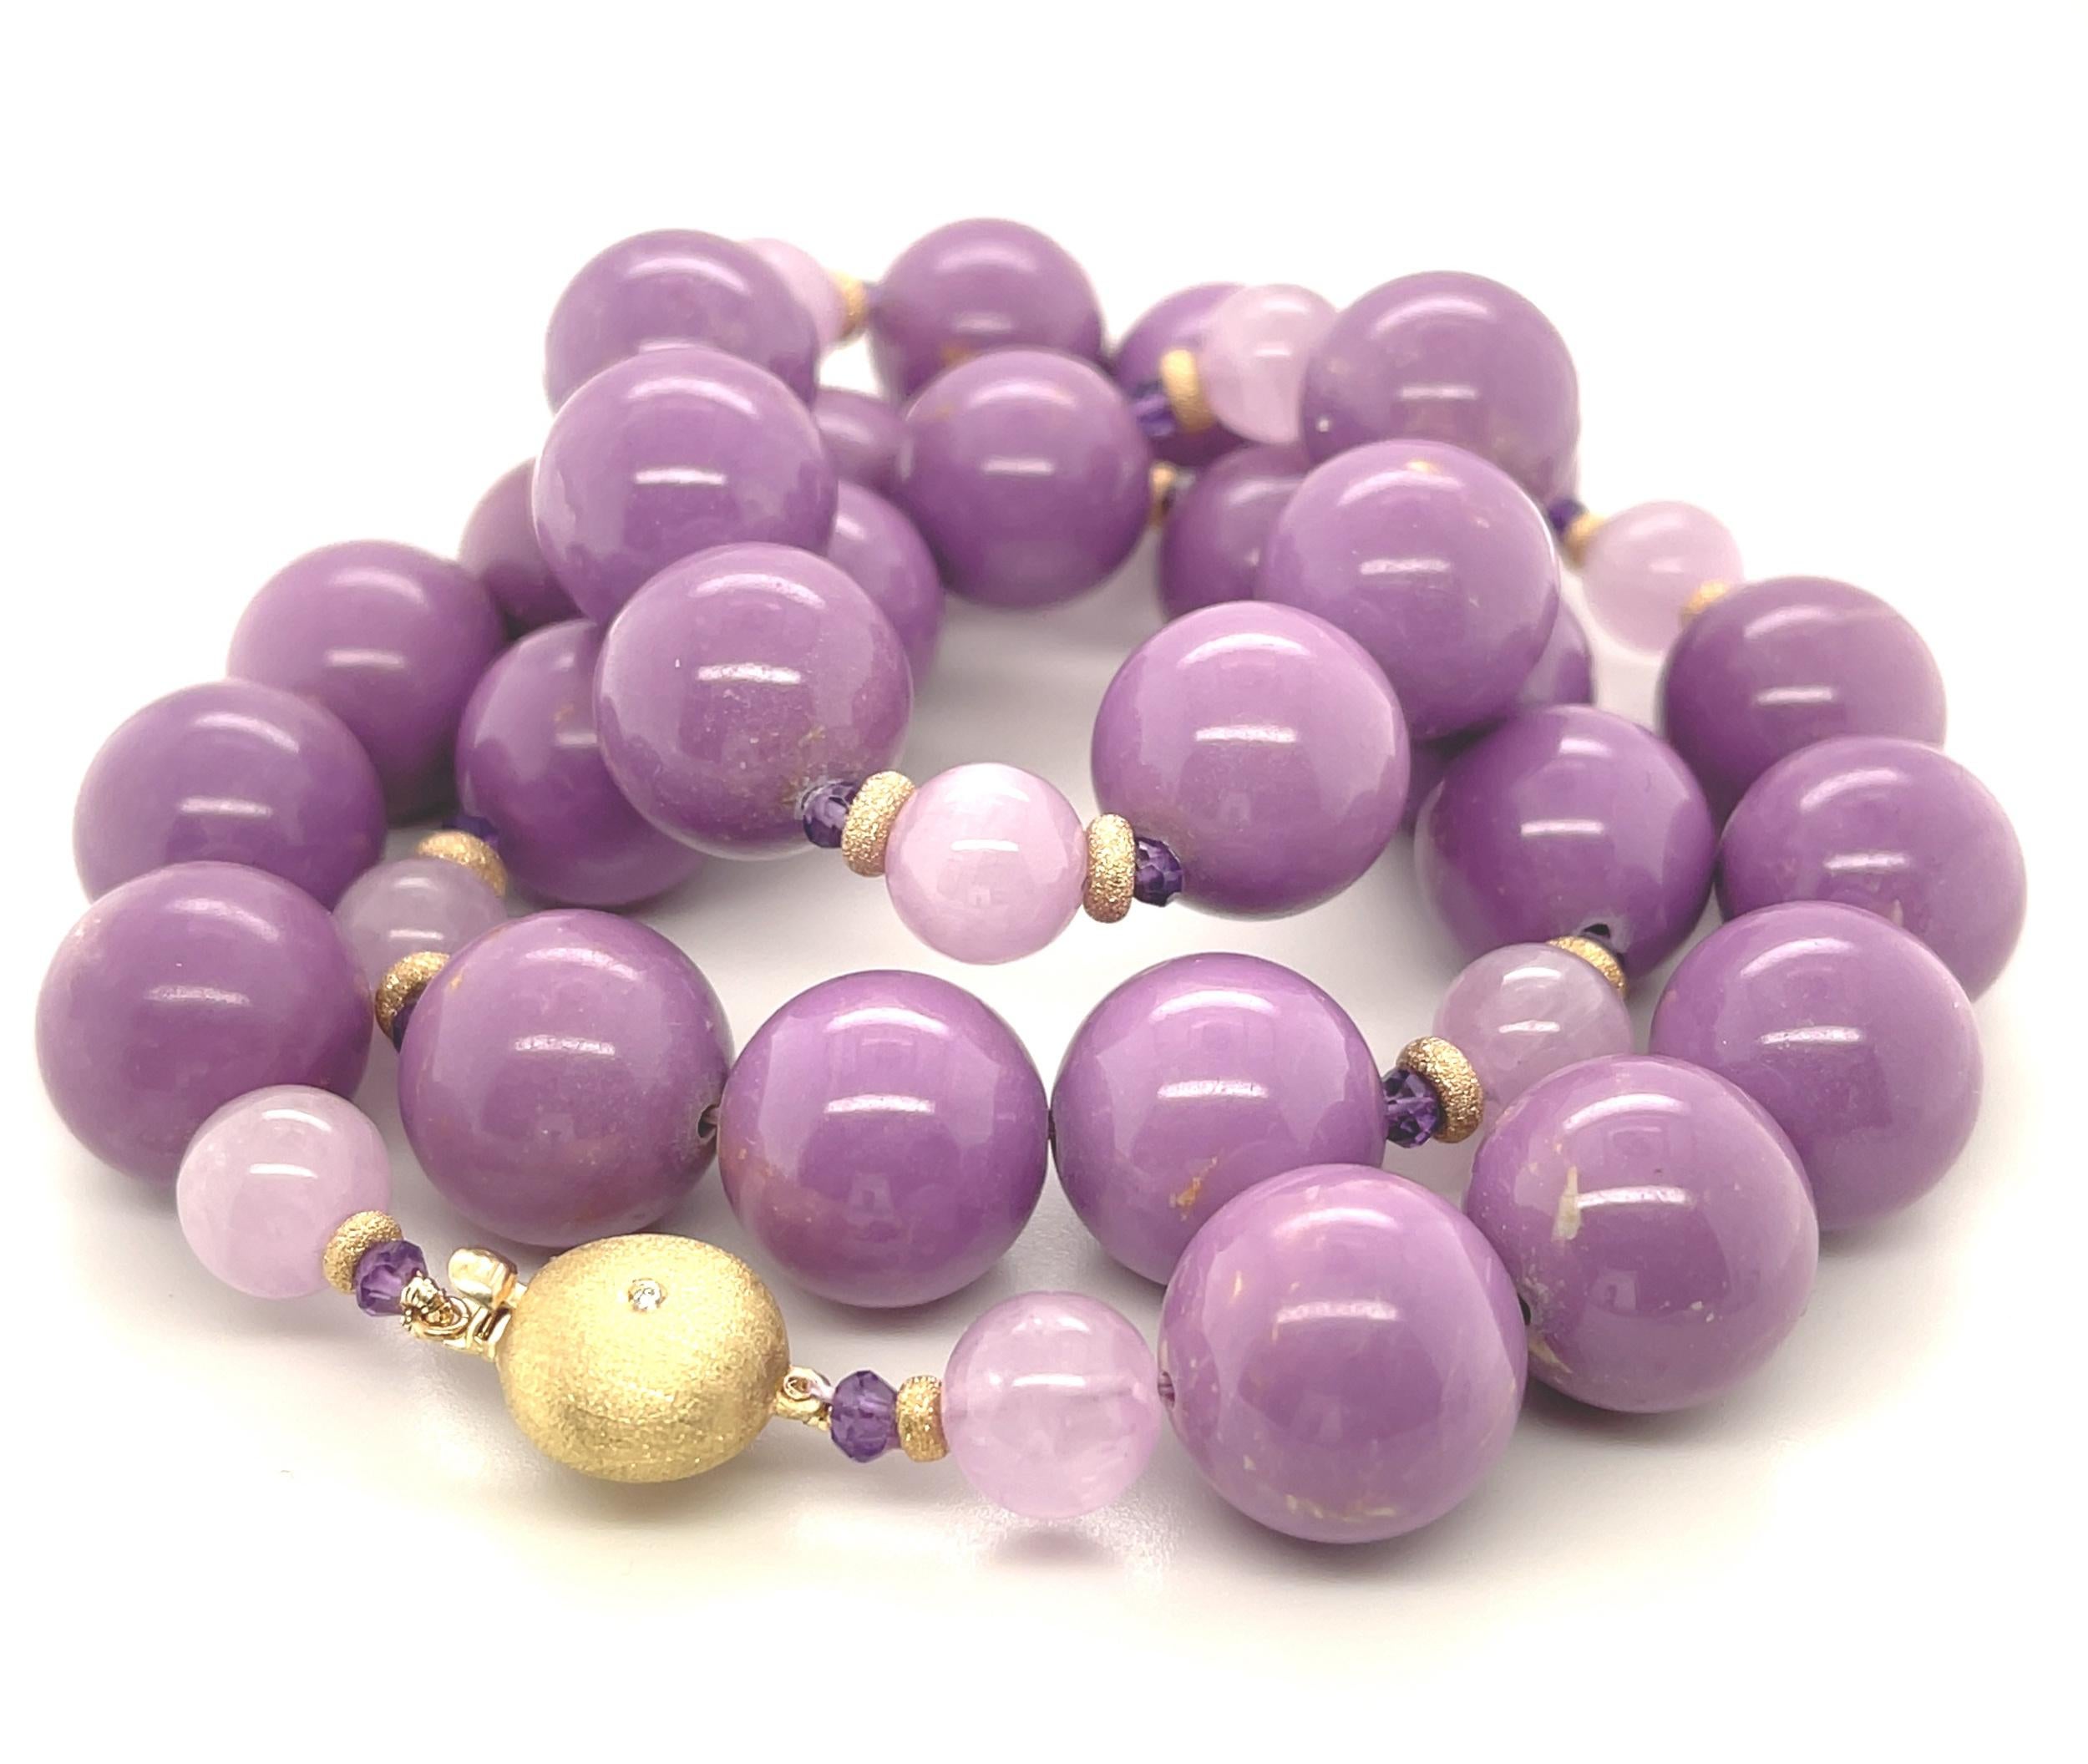 This beautiful and unusual necklace features a gorgeous collection of luscious purple phosphosiderite beads, elegantly arranged with pink kunzite beads, royal purple amethyst, and textured yellow gold accents! The large phosphosiderite beads measure